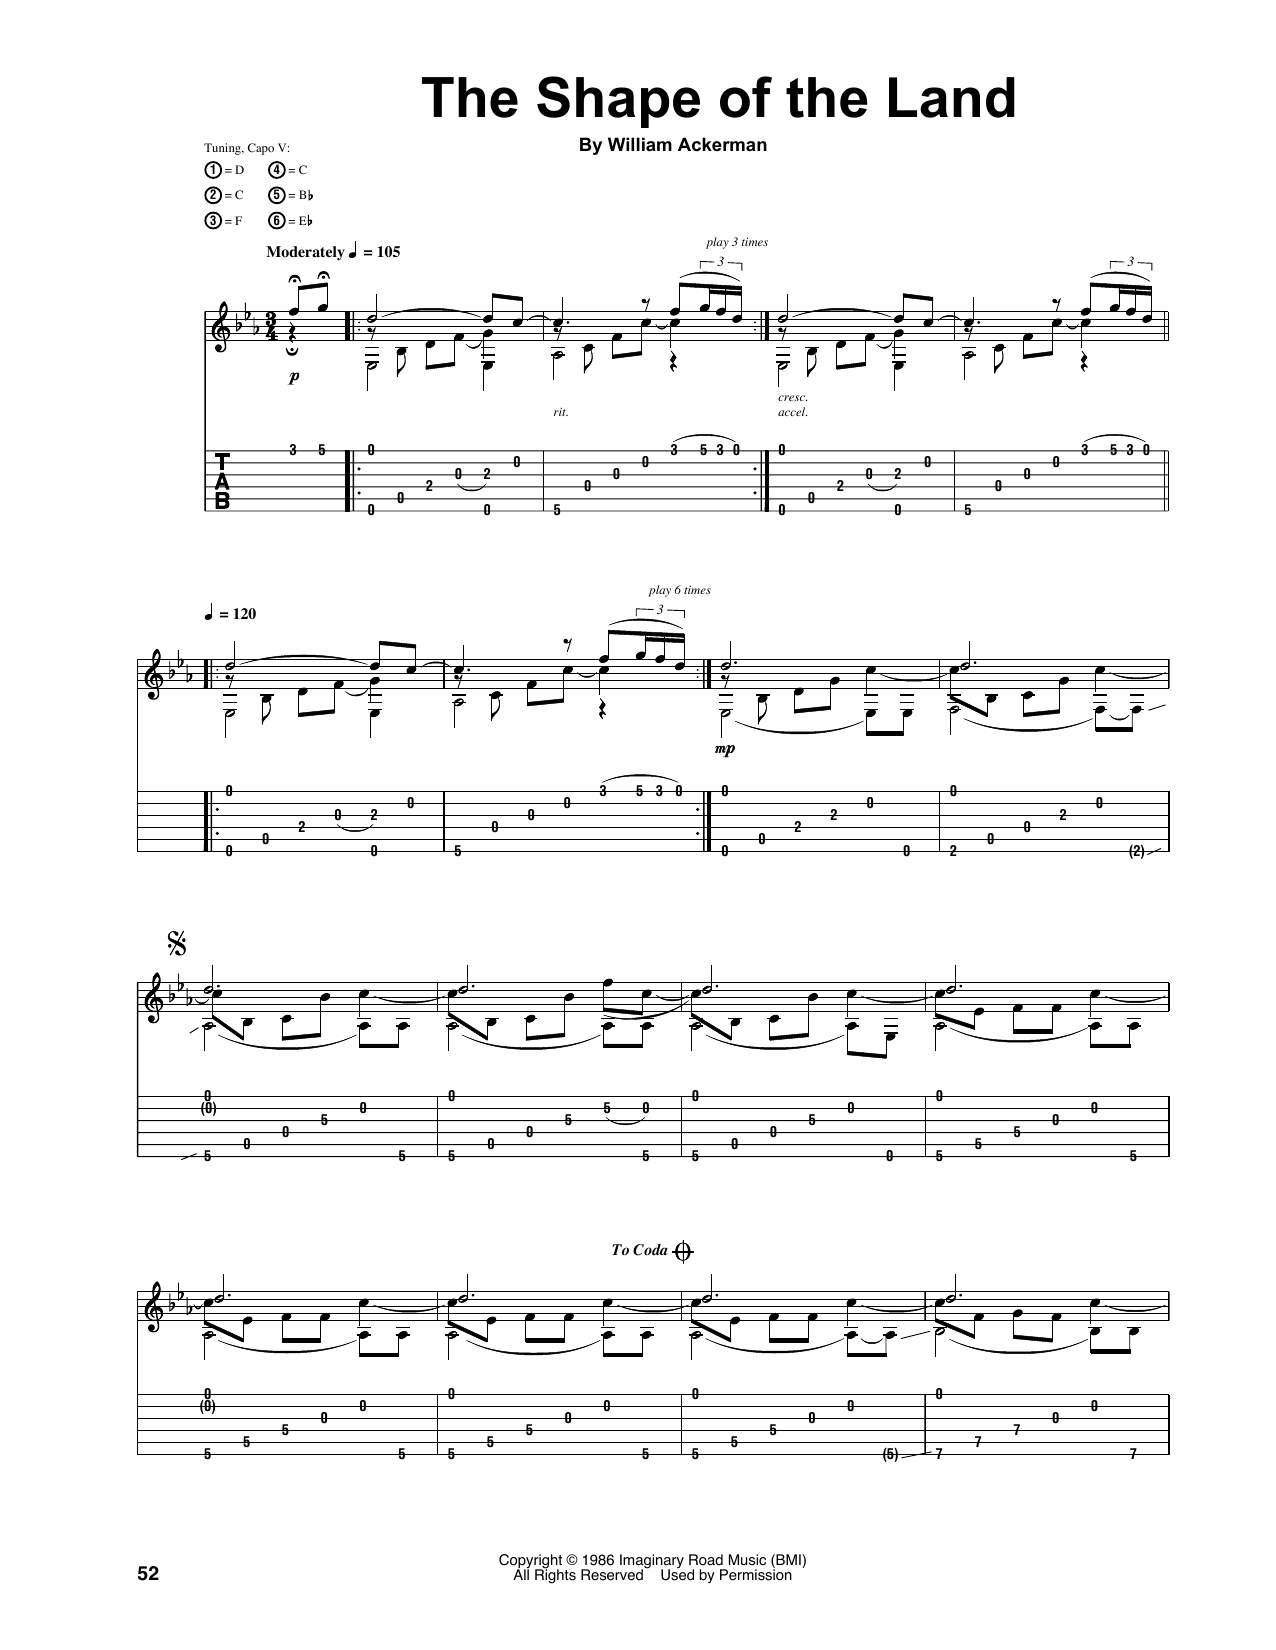 Download Will Ackerman The Shape Of The Land Sheet Music